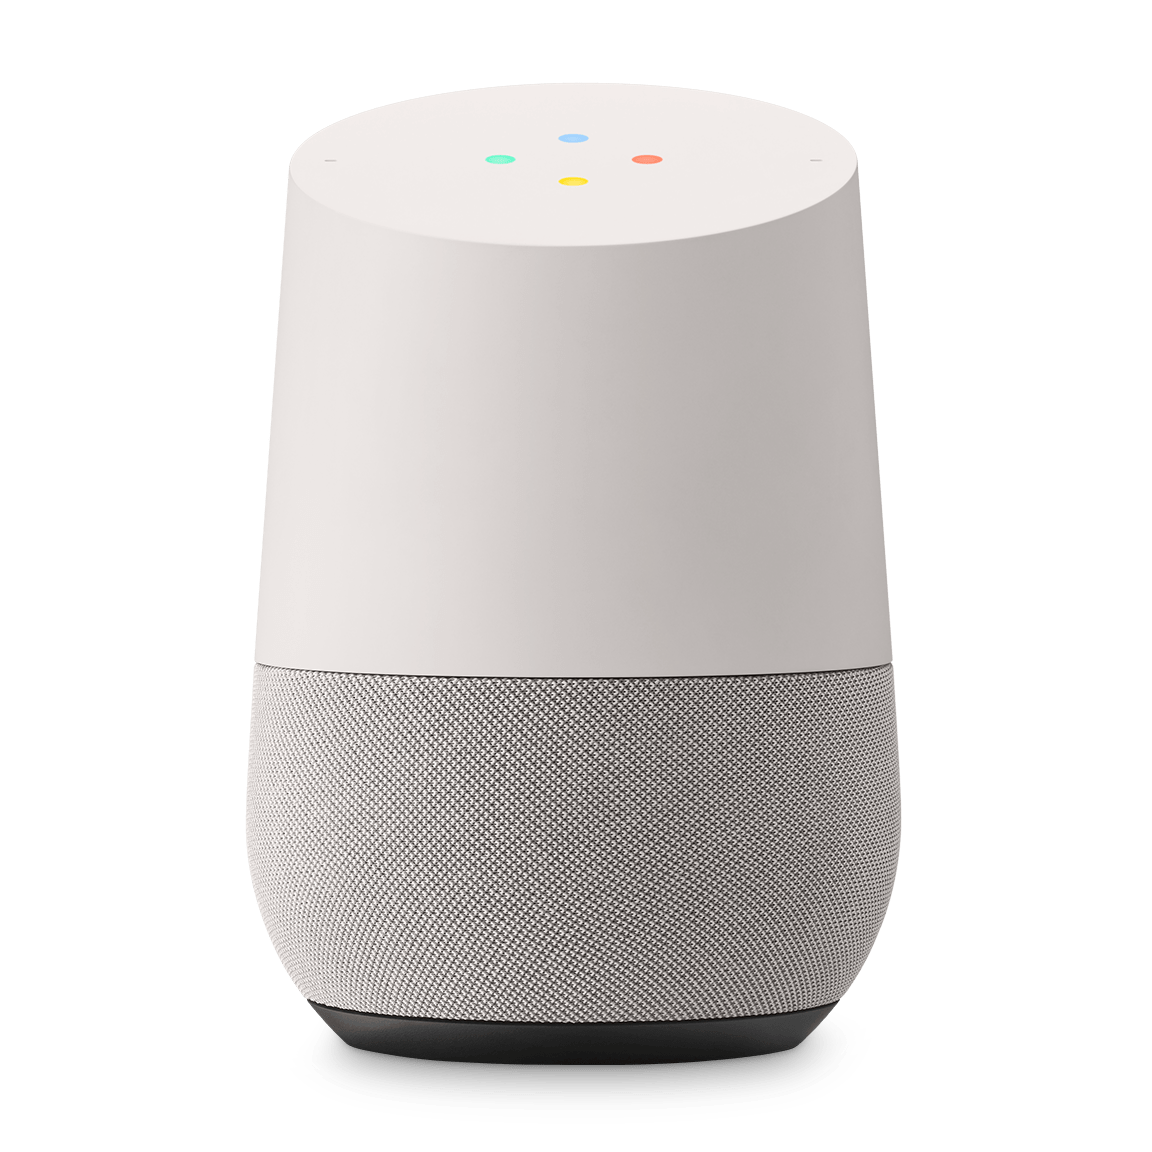 Control your smart switches with Google home assistant